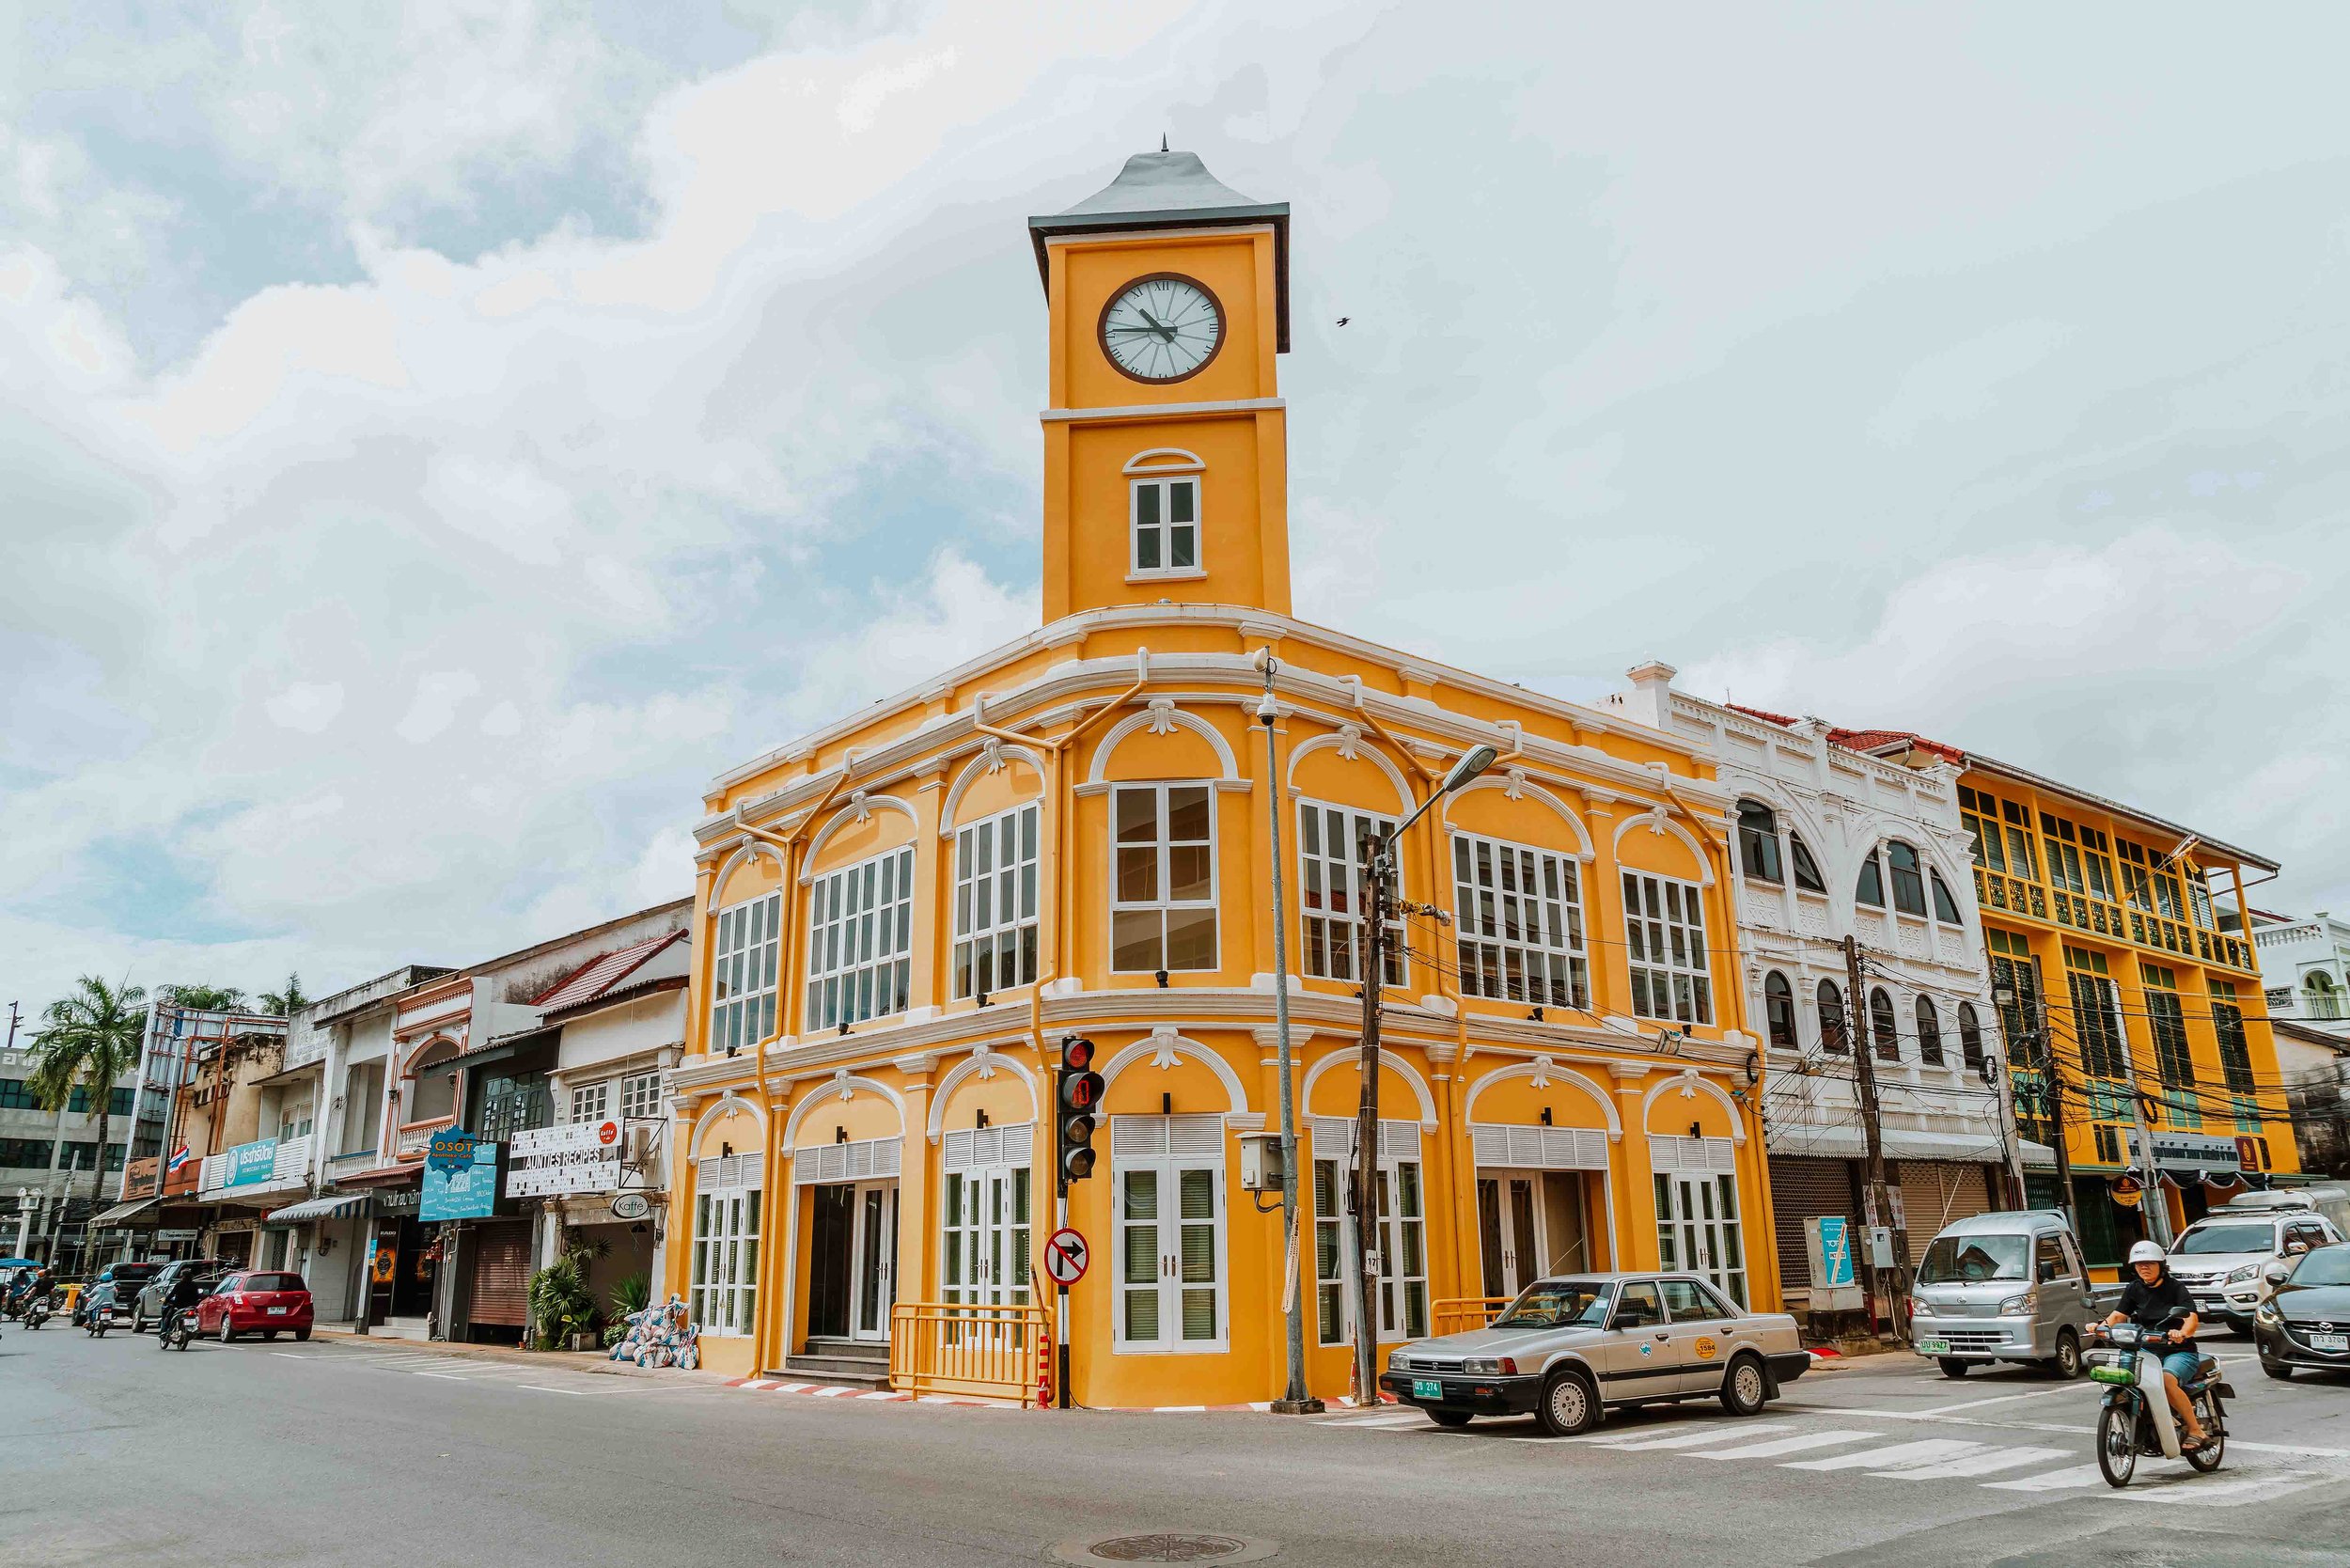 A beautiful yellow Sino Portuguese building in old town phuket on a 7 days in phuket itinerary